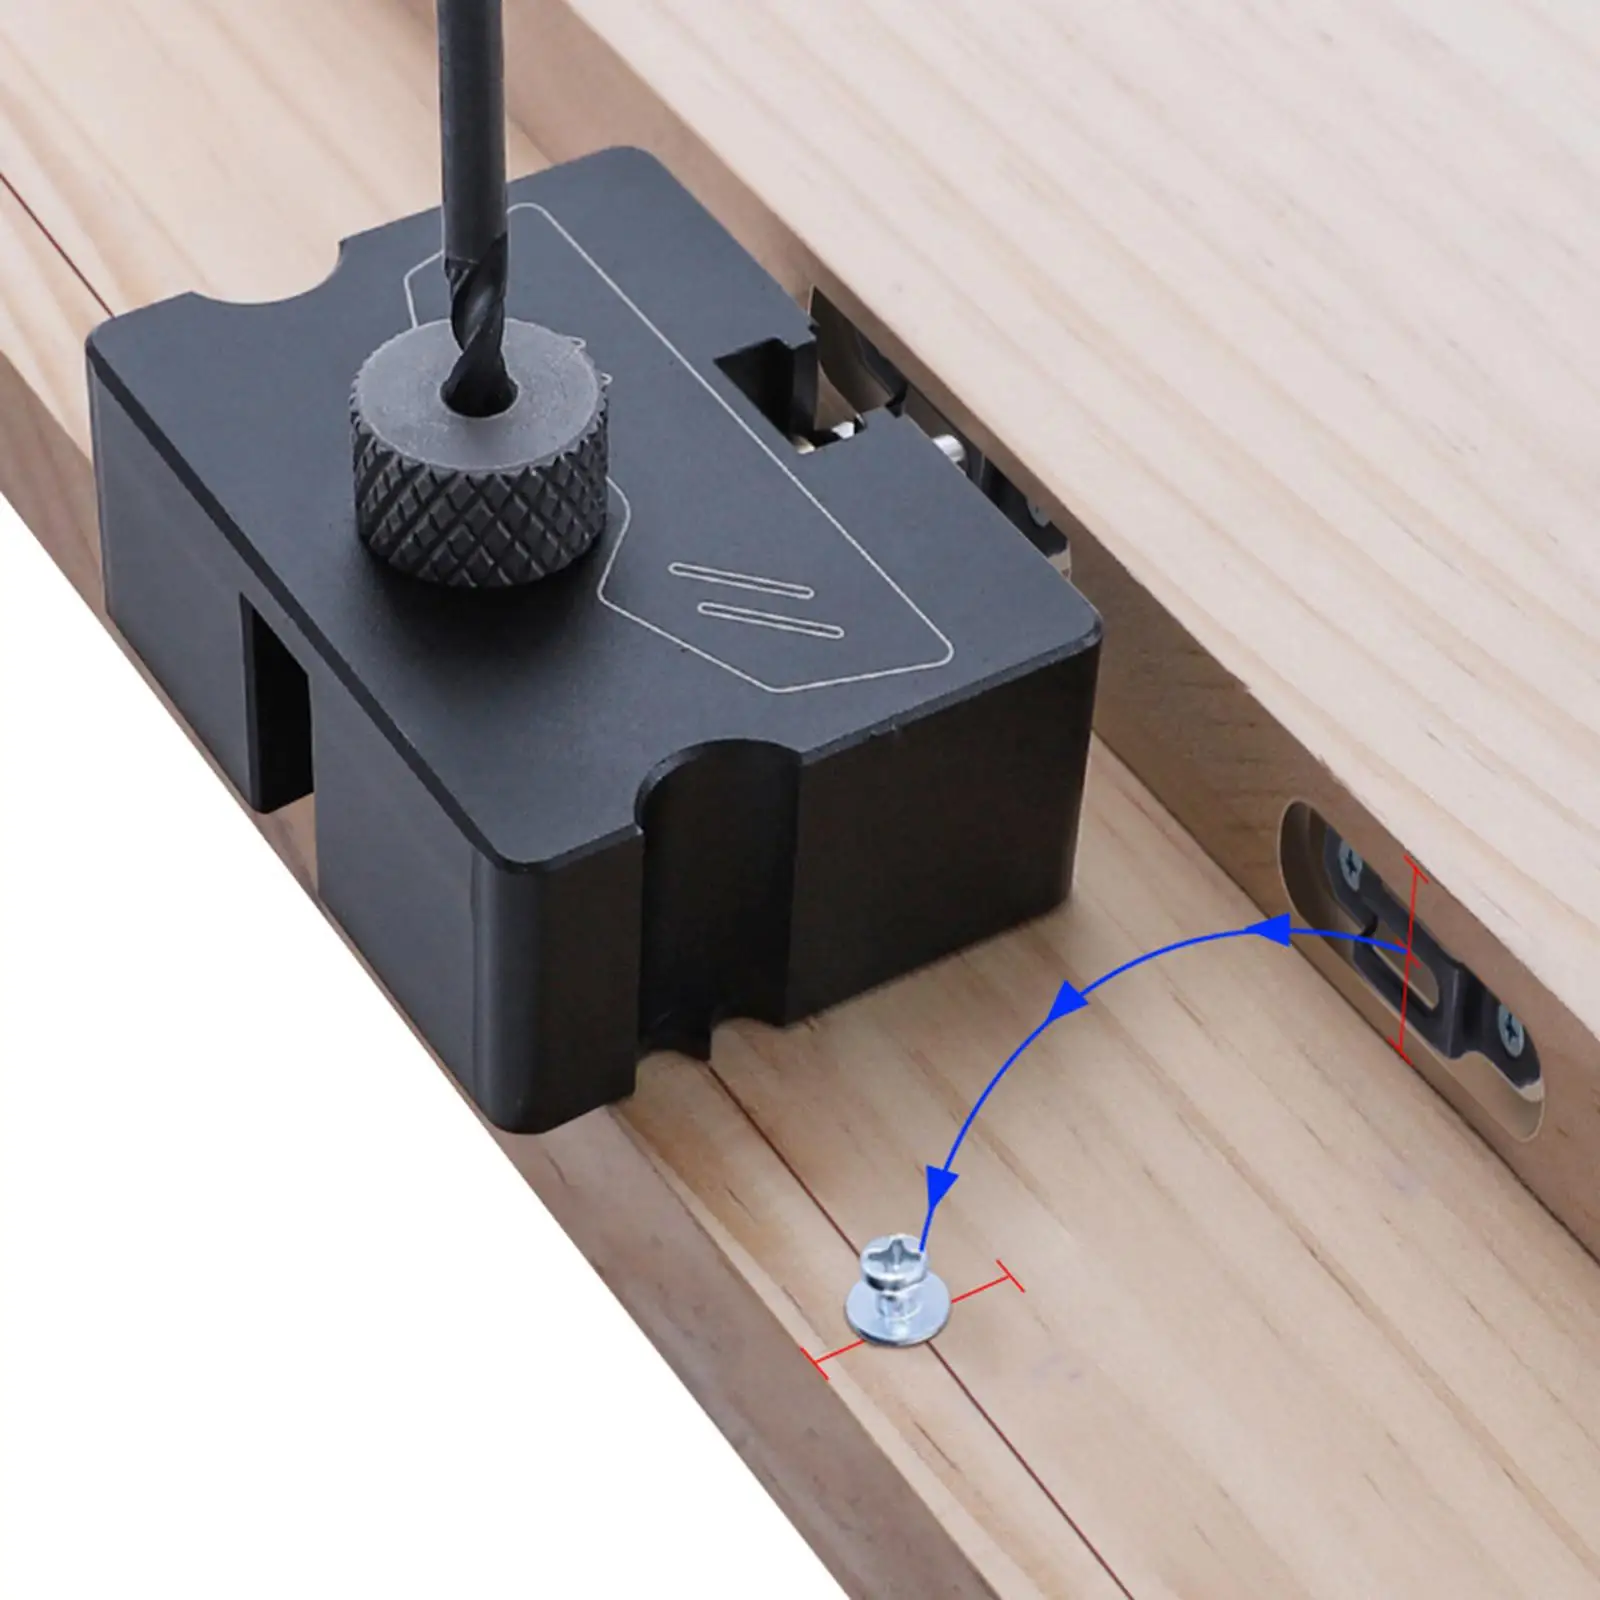 Professional Pocket Hole Jig Kit Positioning Punch Tools Drilling Tools, Positioning Hole Puncher for Woodwork Carpentry Joinery